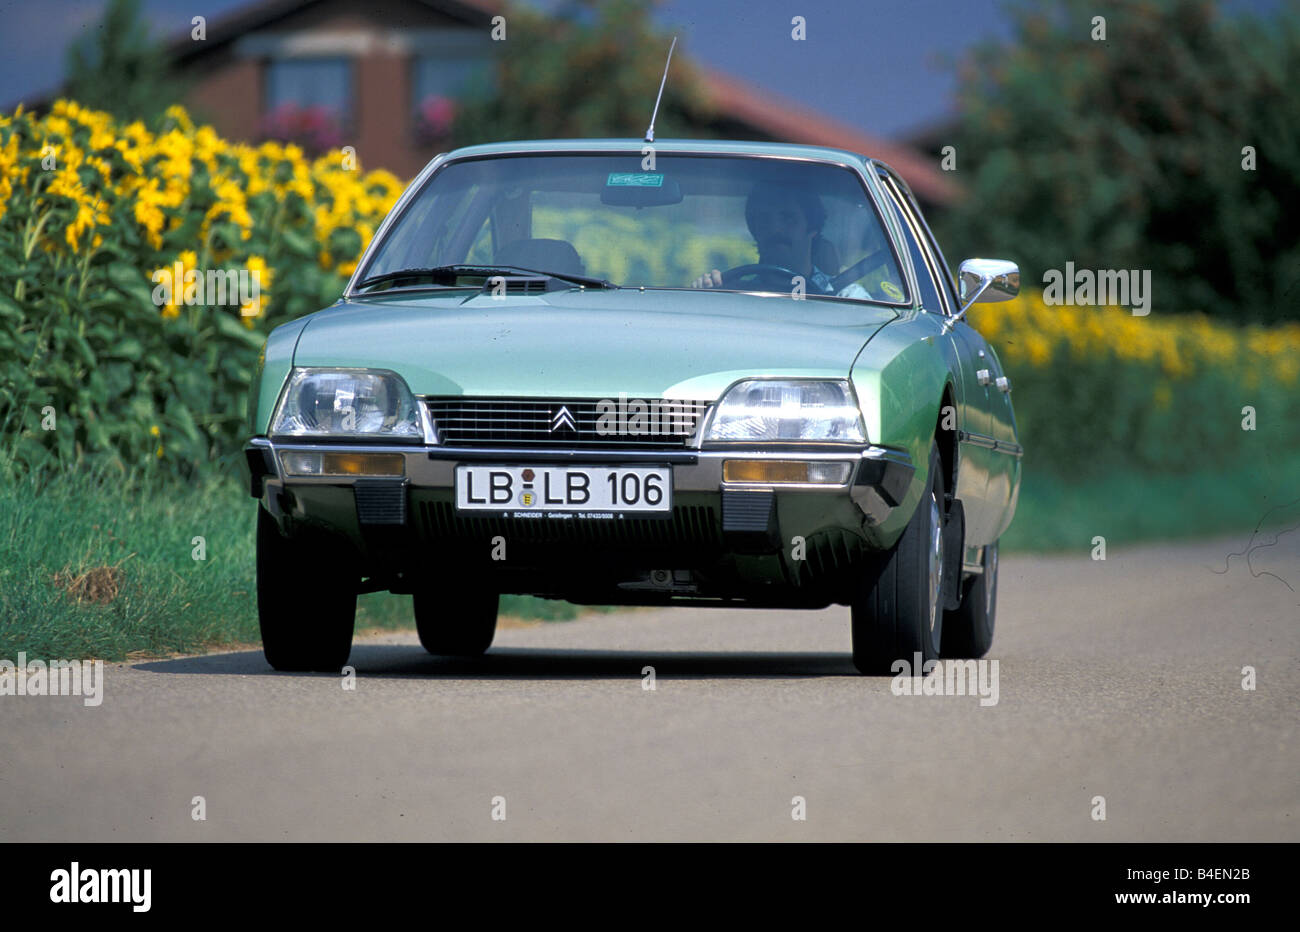 Car, Citroen CX 2400 Pallas, model year 1974-1983, old car, 1970s, seventies,  1980s, eighties, green, driving, diagonal front, Stock Photo